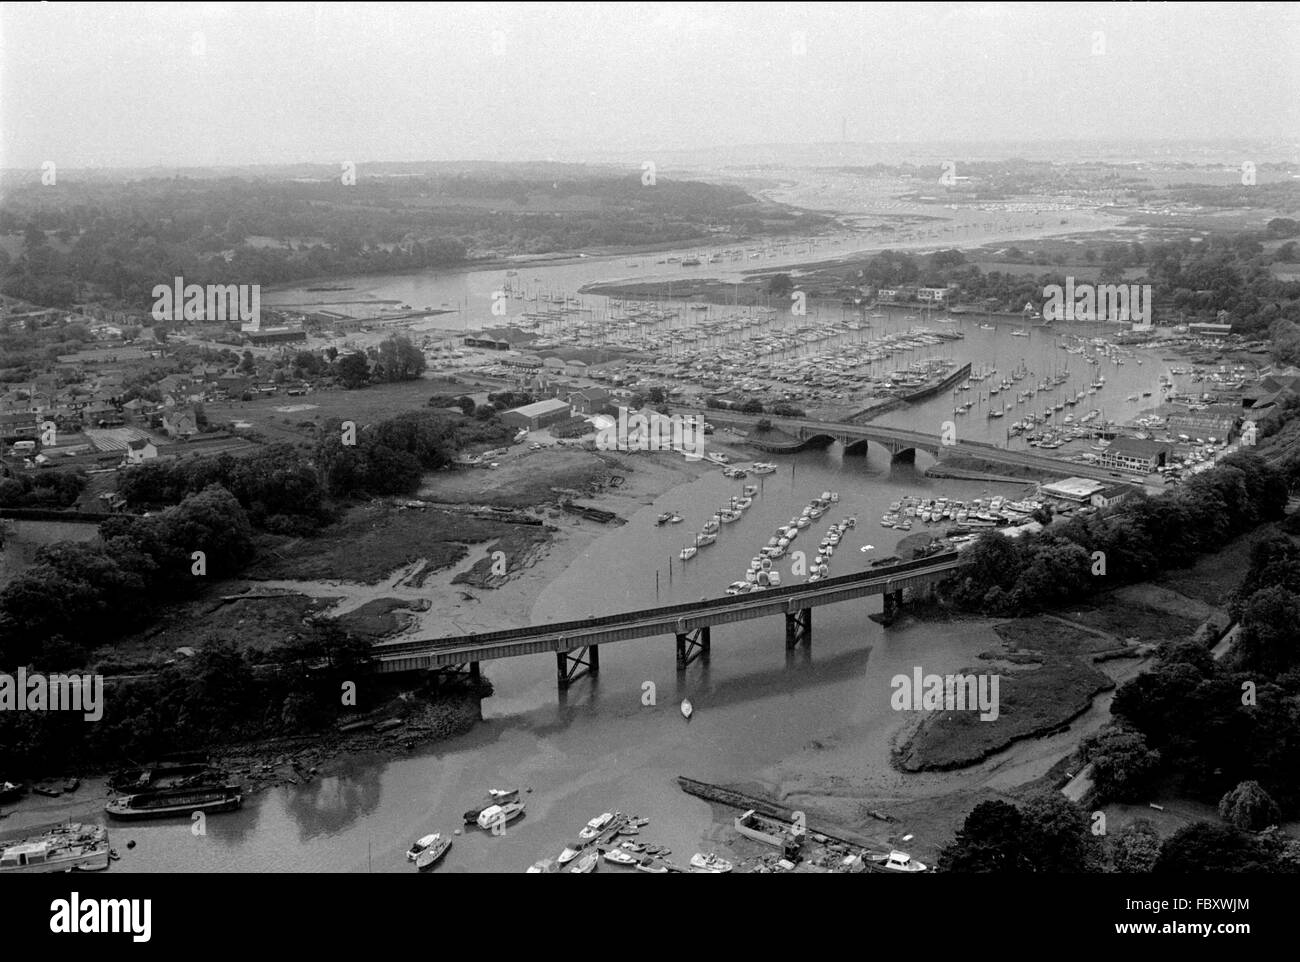 AJAXNETPHOTO. 1979. BURSLEDON, ENGLAND. - YACHTING MECCA - AERIAL VIEW OF THE FAMOUS HAMBLE RIVER WINDING SOUTH WEST TOWARD SOUTHAMPTON WATER AND THE SOLENT. FOREGROUND IS THE BURSLEDON RAILWAY RIVER CROSSING VIADUCT WITH A27 ROAD BRIDGE CENTRE RIGHT.  PHOTO:JONATHAN EASTLAND/AJAX  REF:12064 Stock Photo